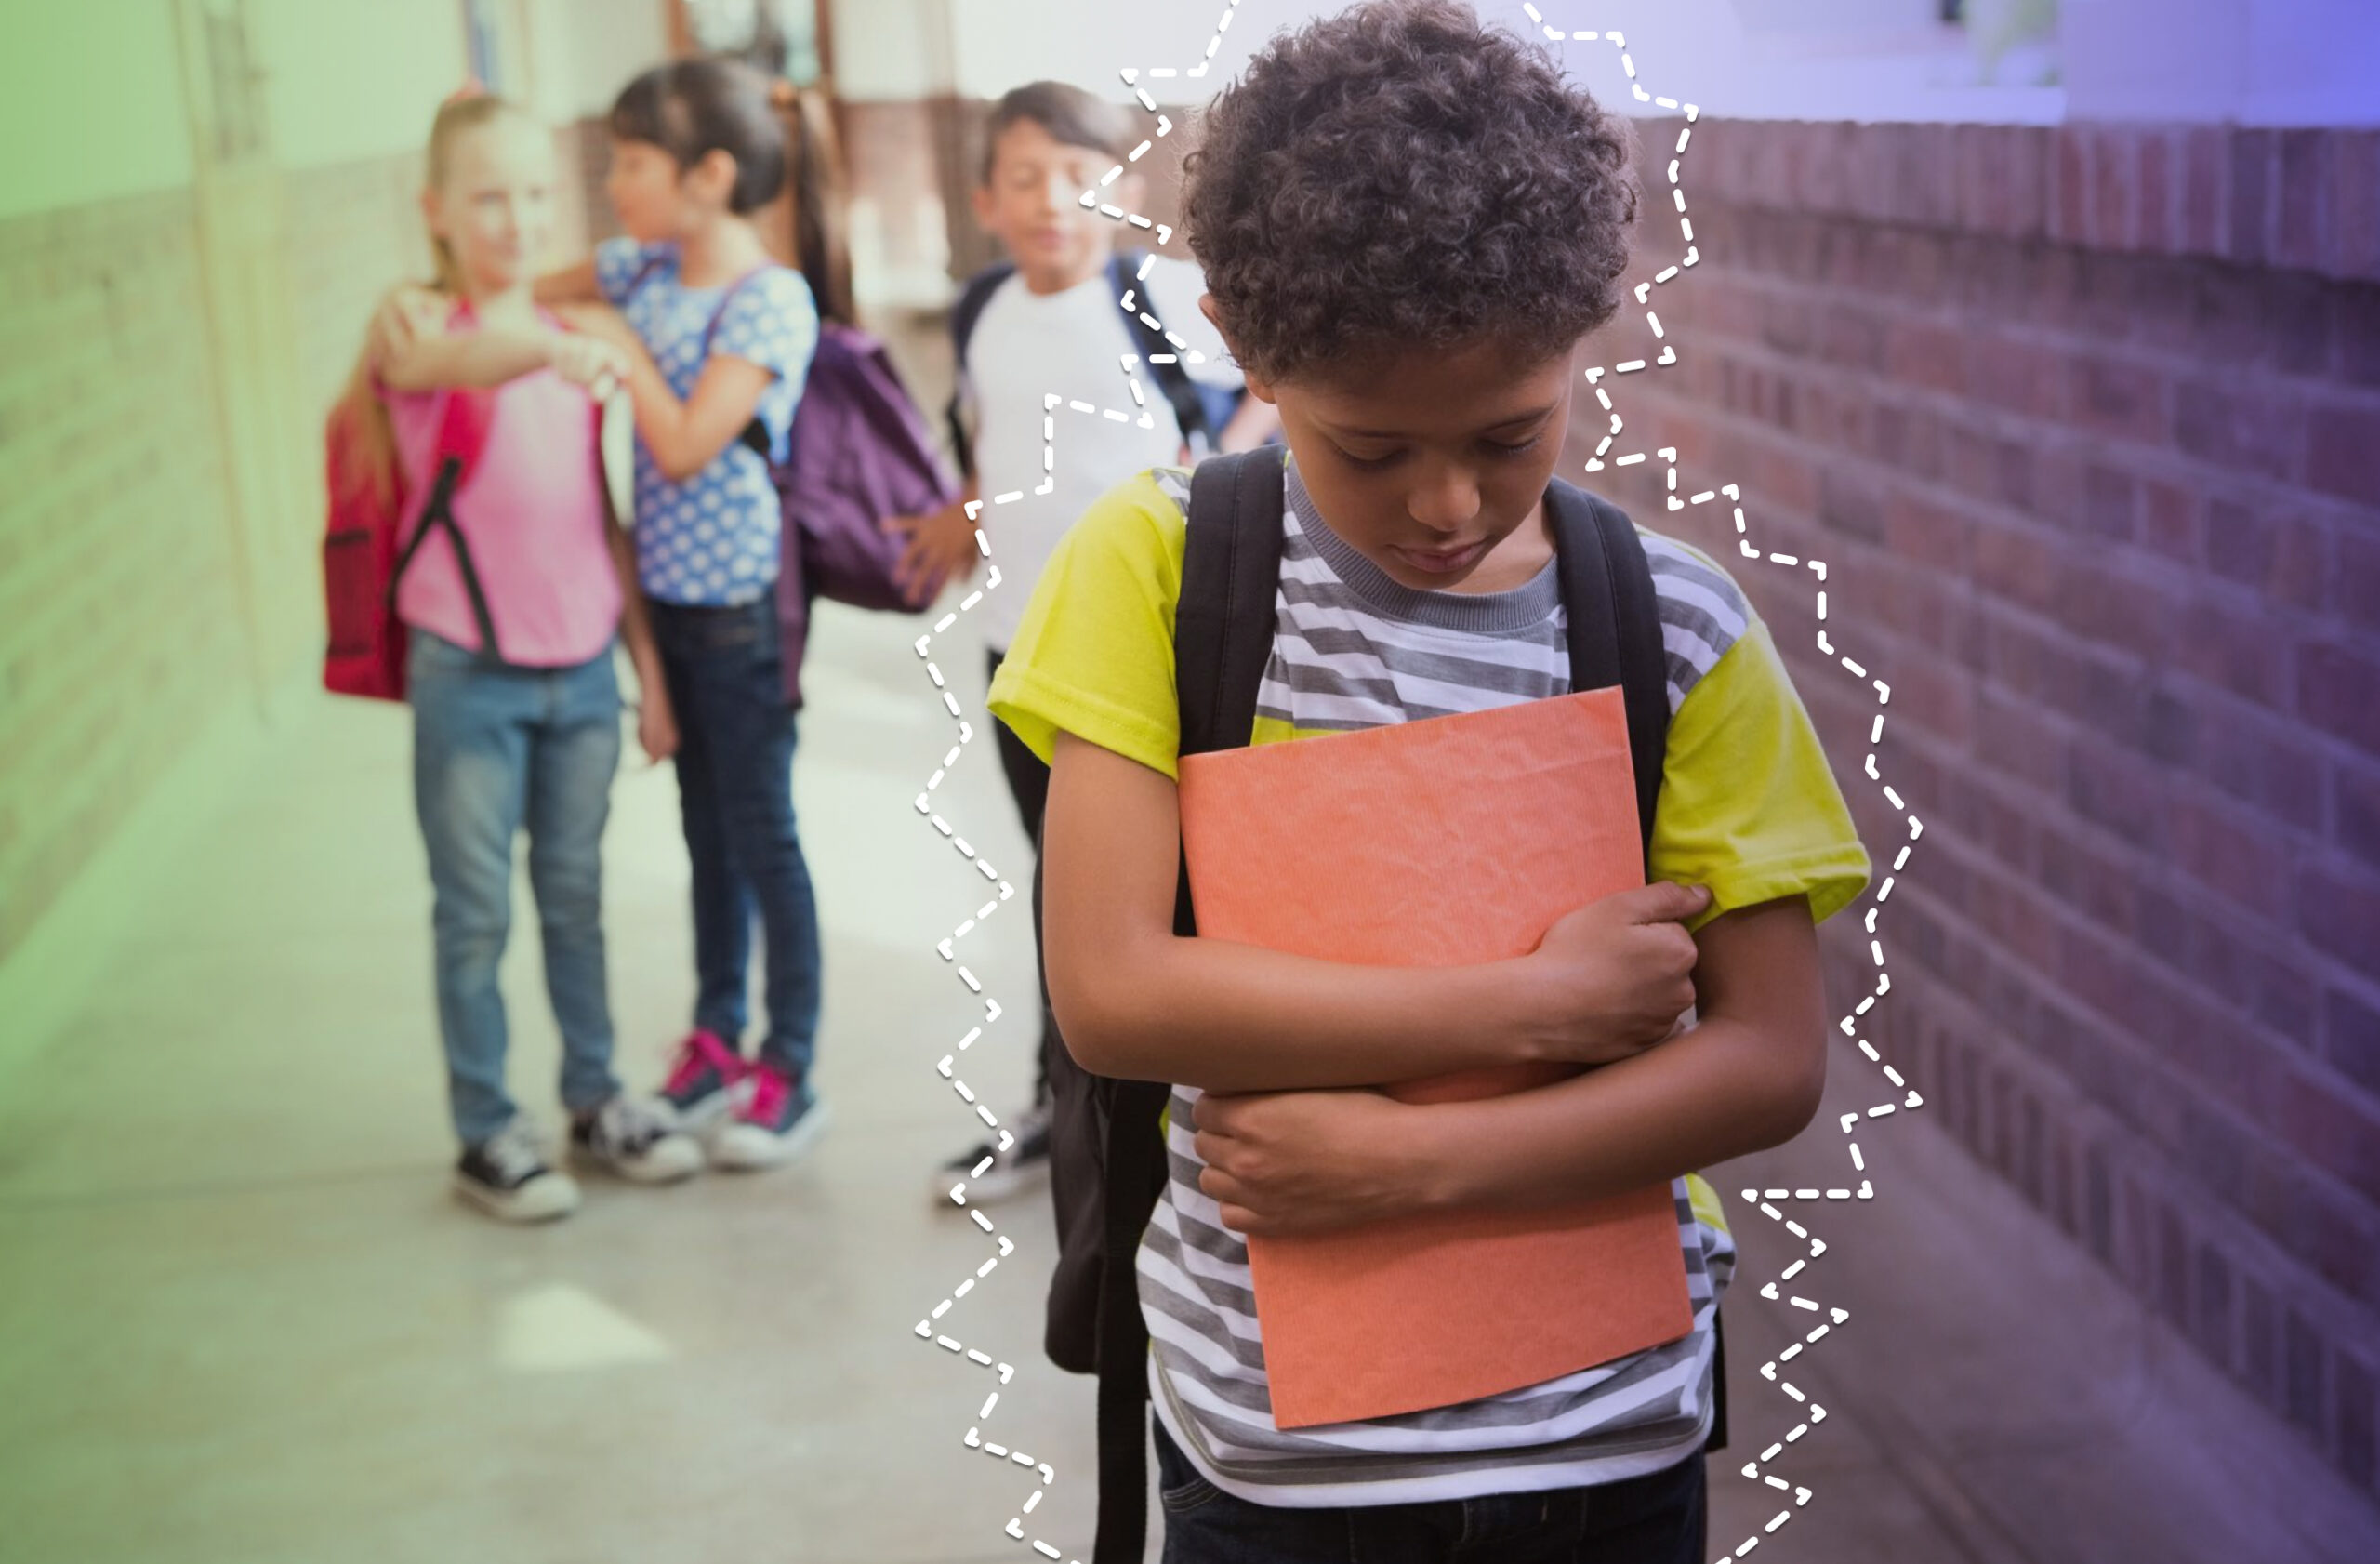 6 Crucial Insights on Bullying for Educators